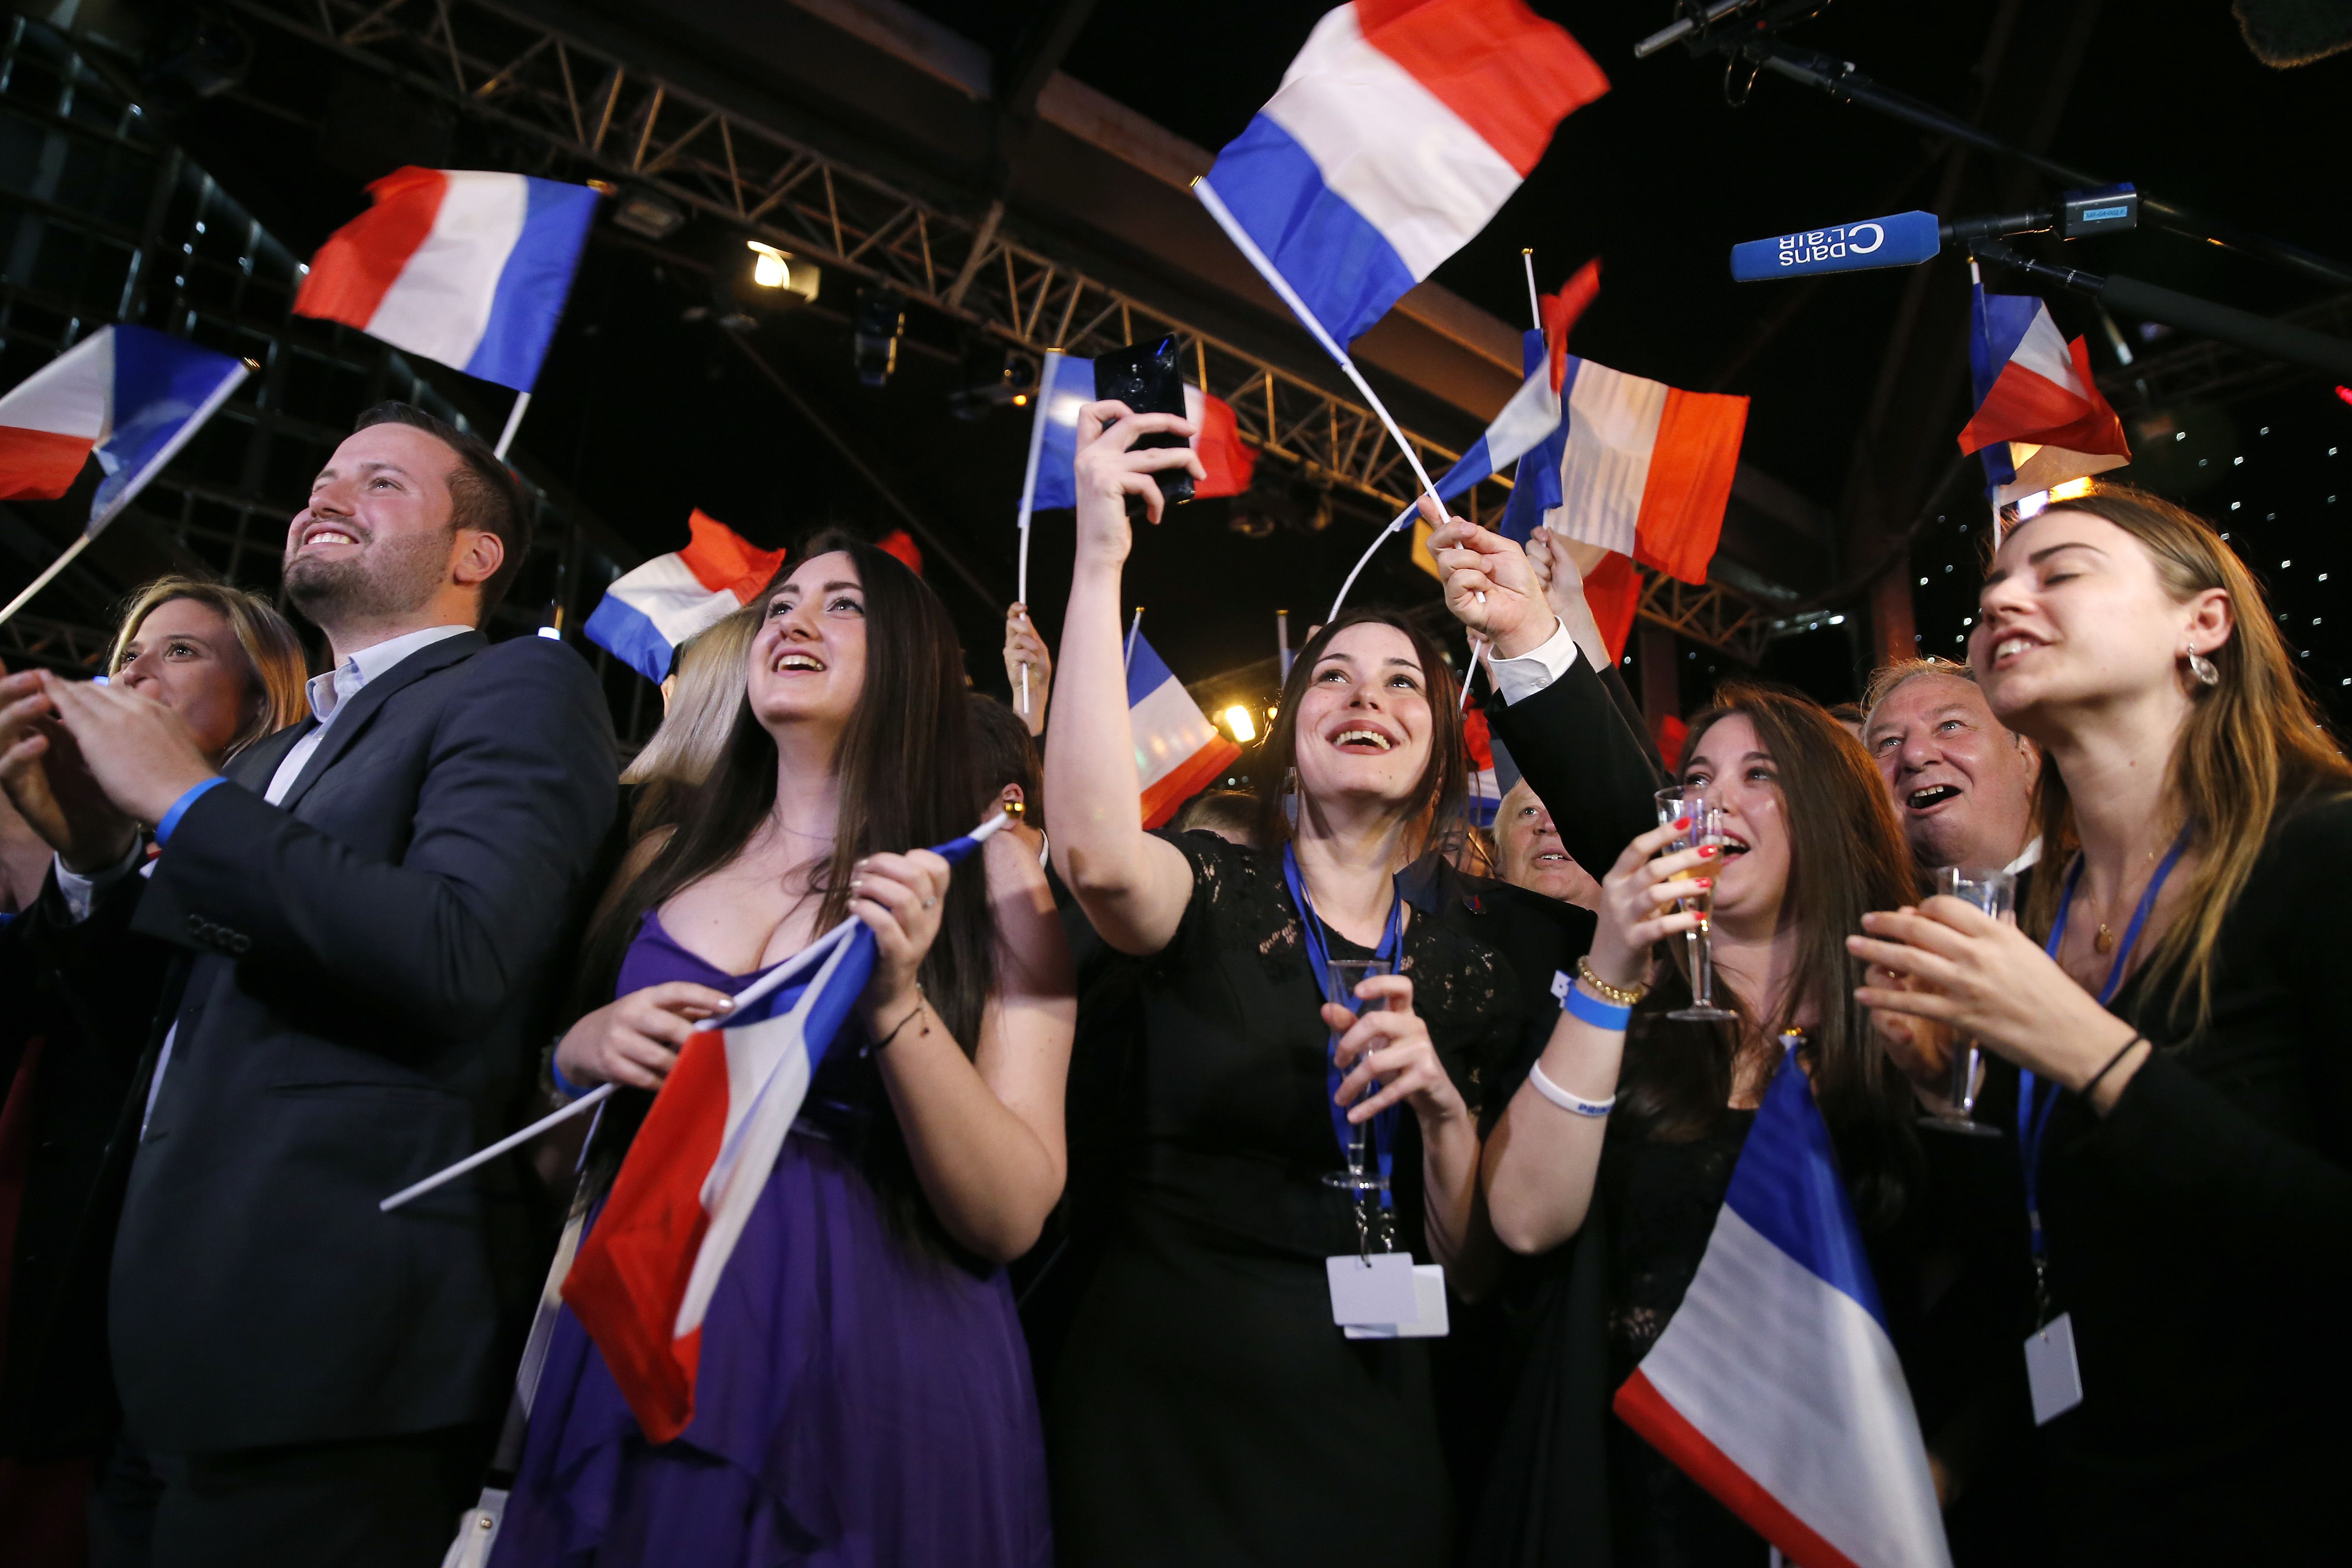 Supporters of French far-Right National Rally political party react after the projections for the results of the European Parliament elections on May 26, 2019 in Paris, France. 